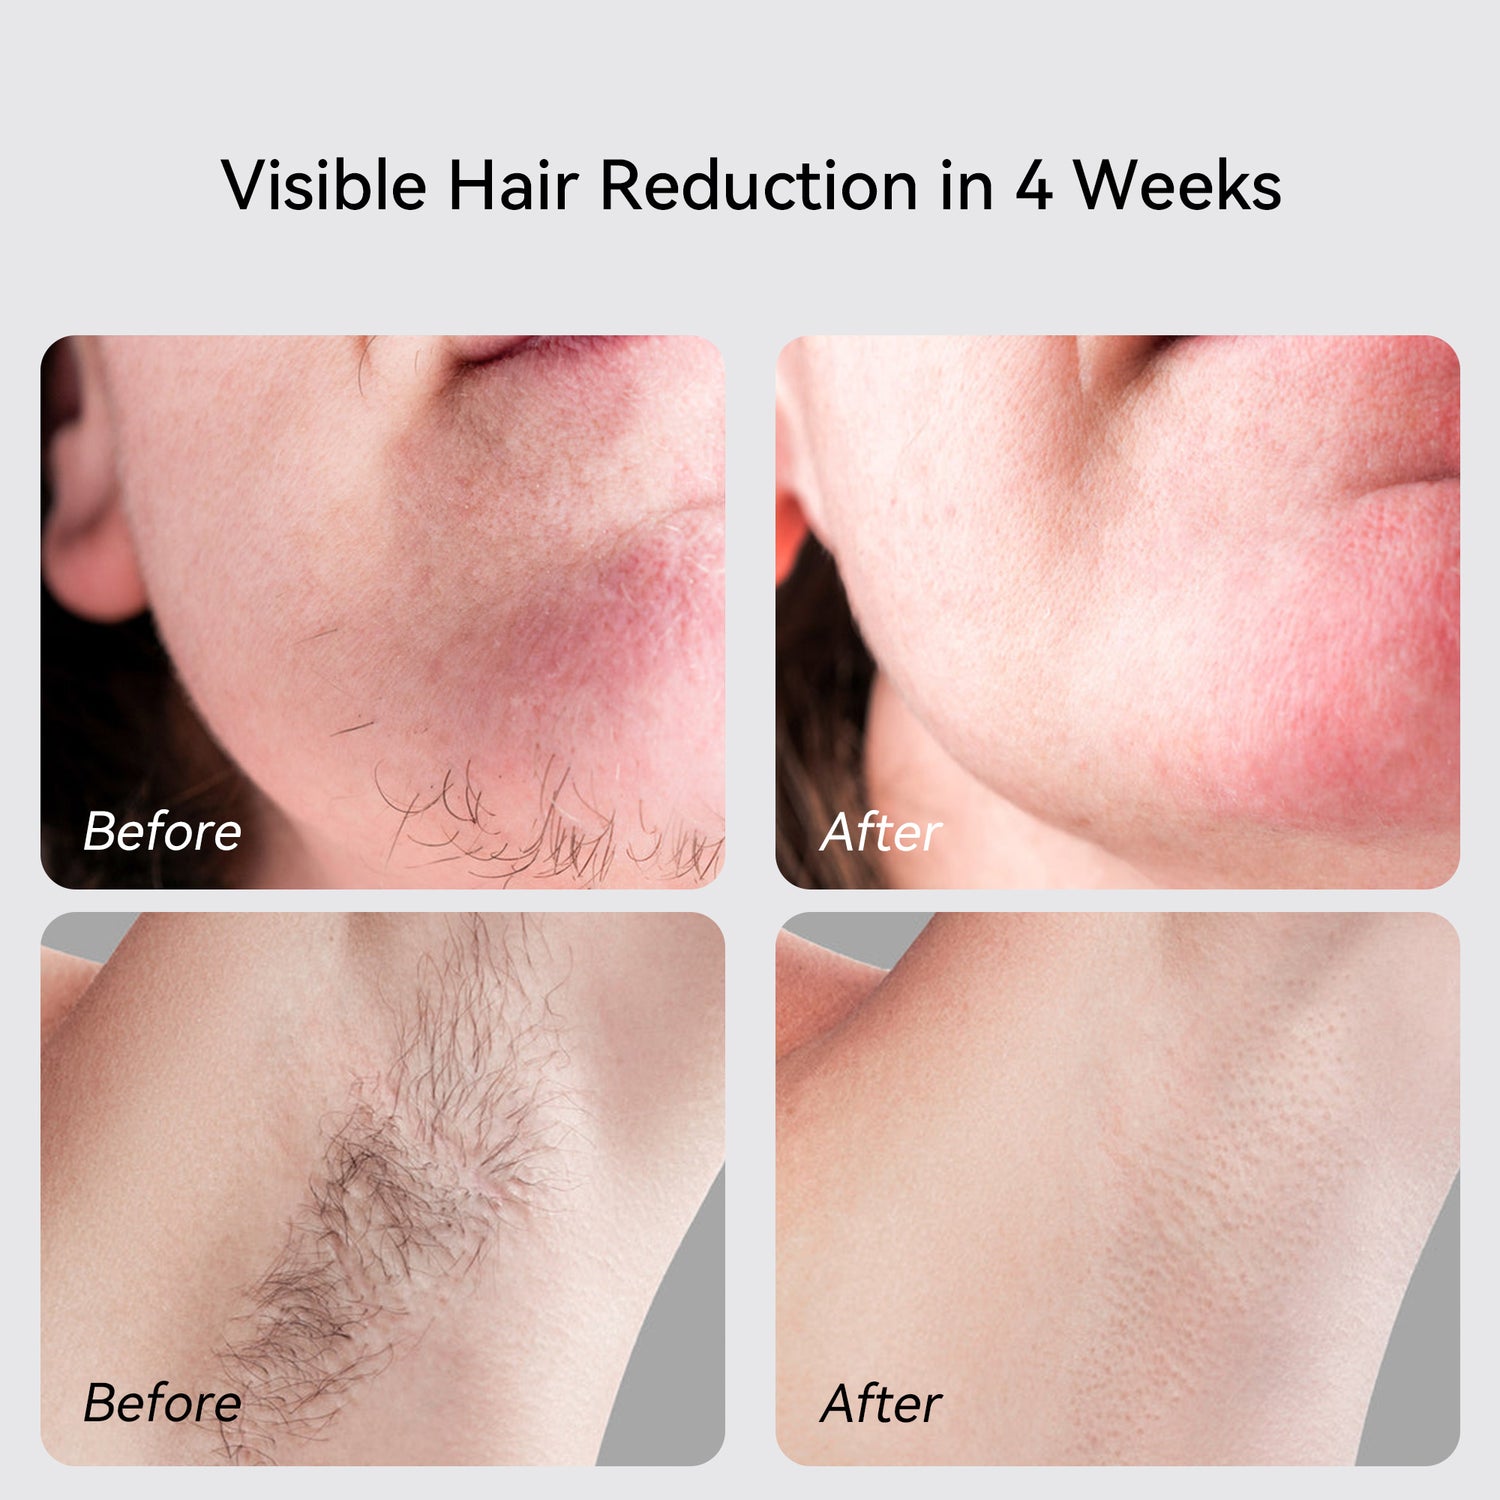 Can I Use IPL Laser Hair Removal on my Face?